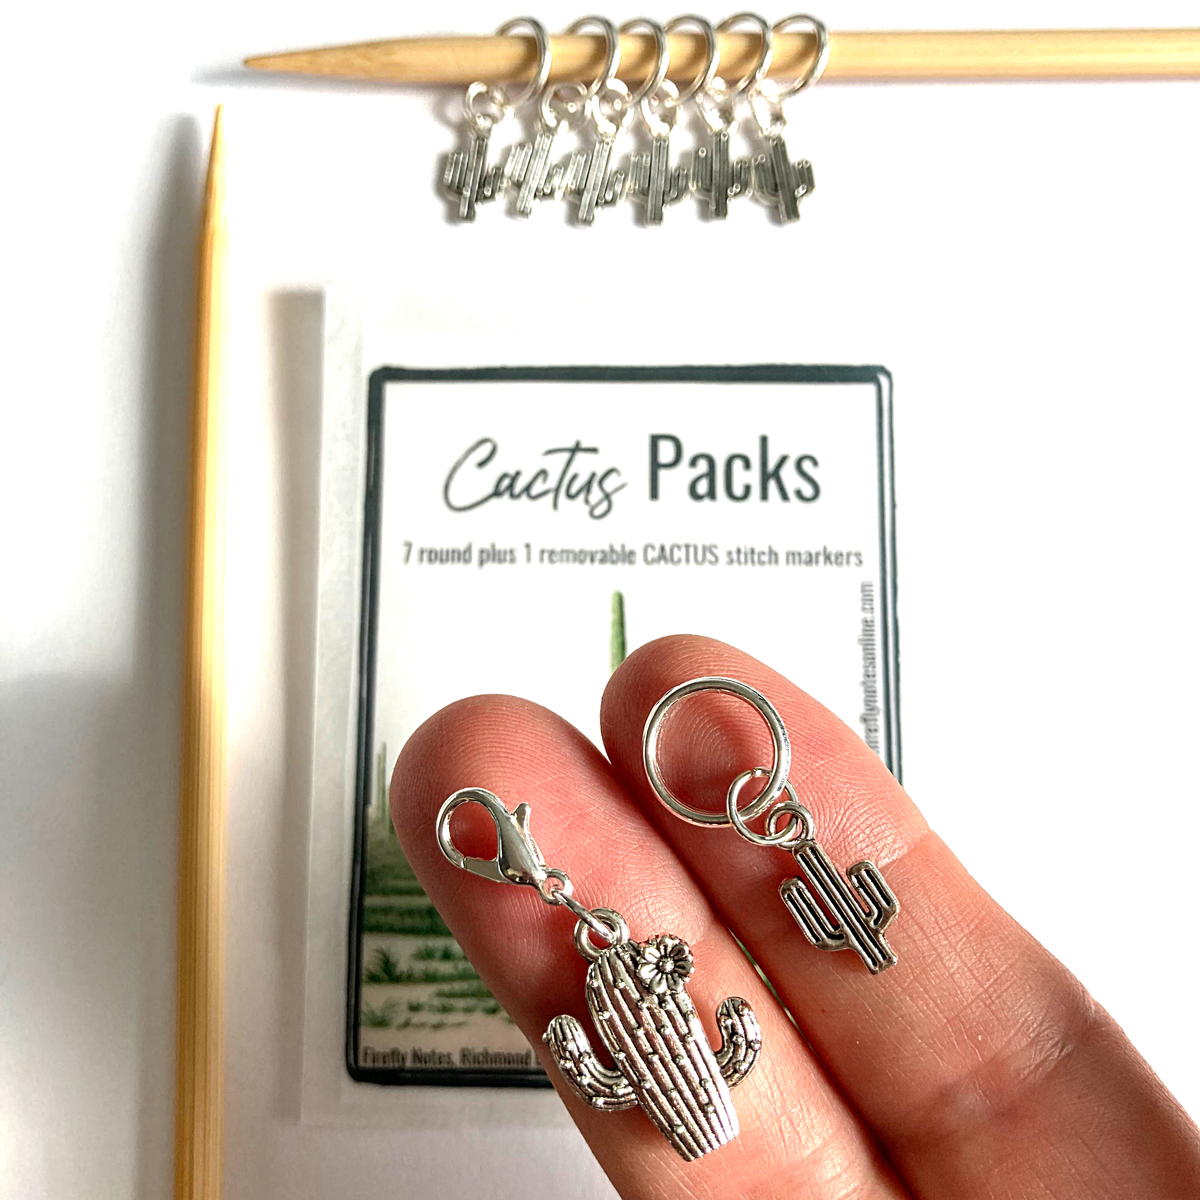 Cactus Stitch Marker Pack - Round &amp; One Removable